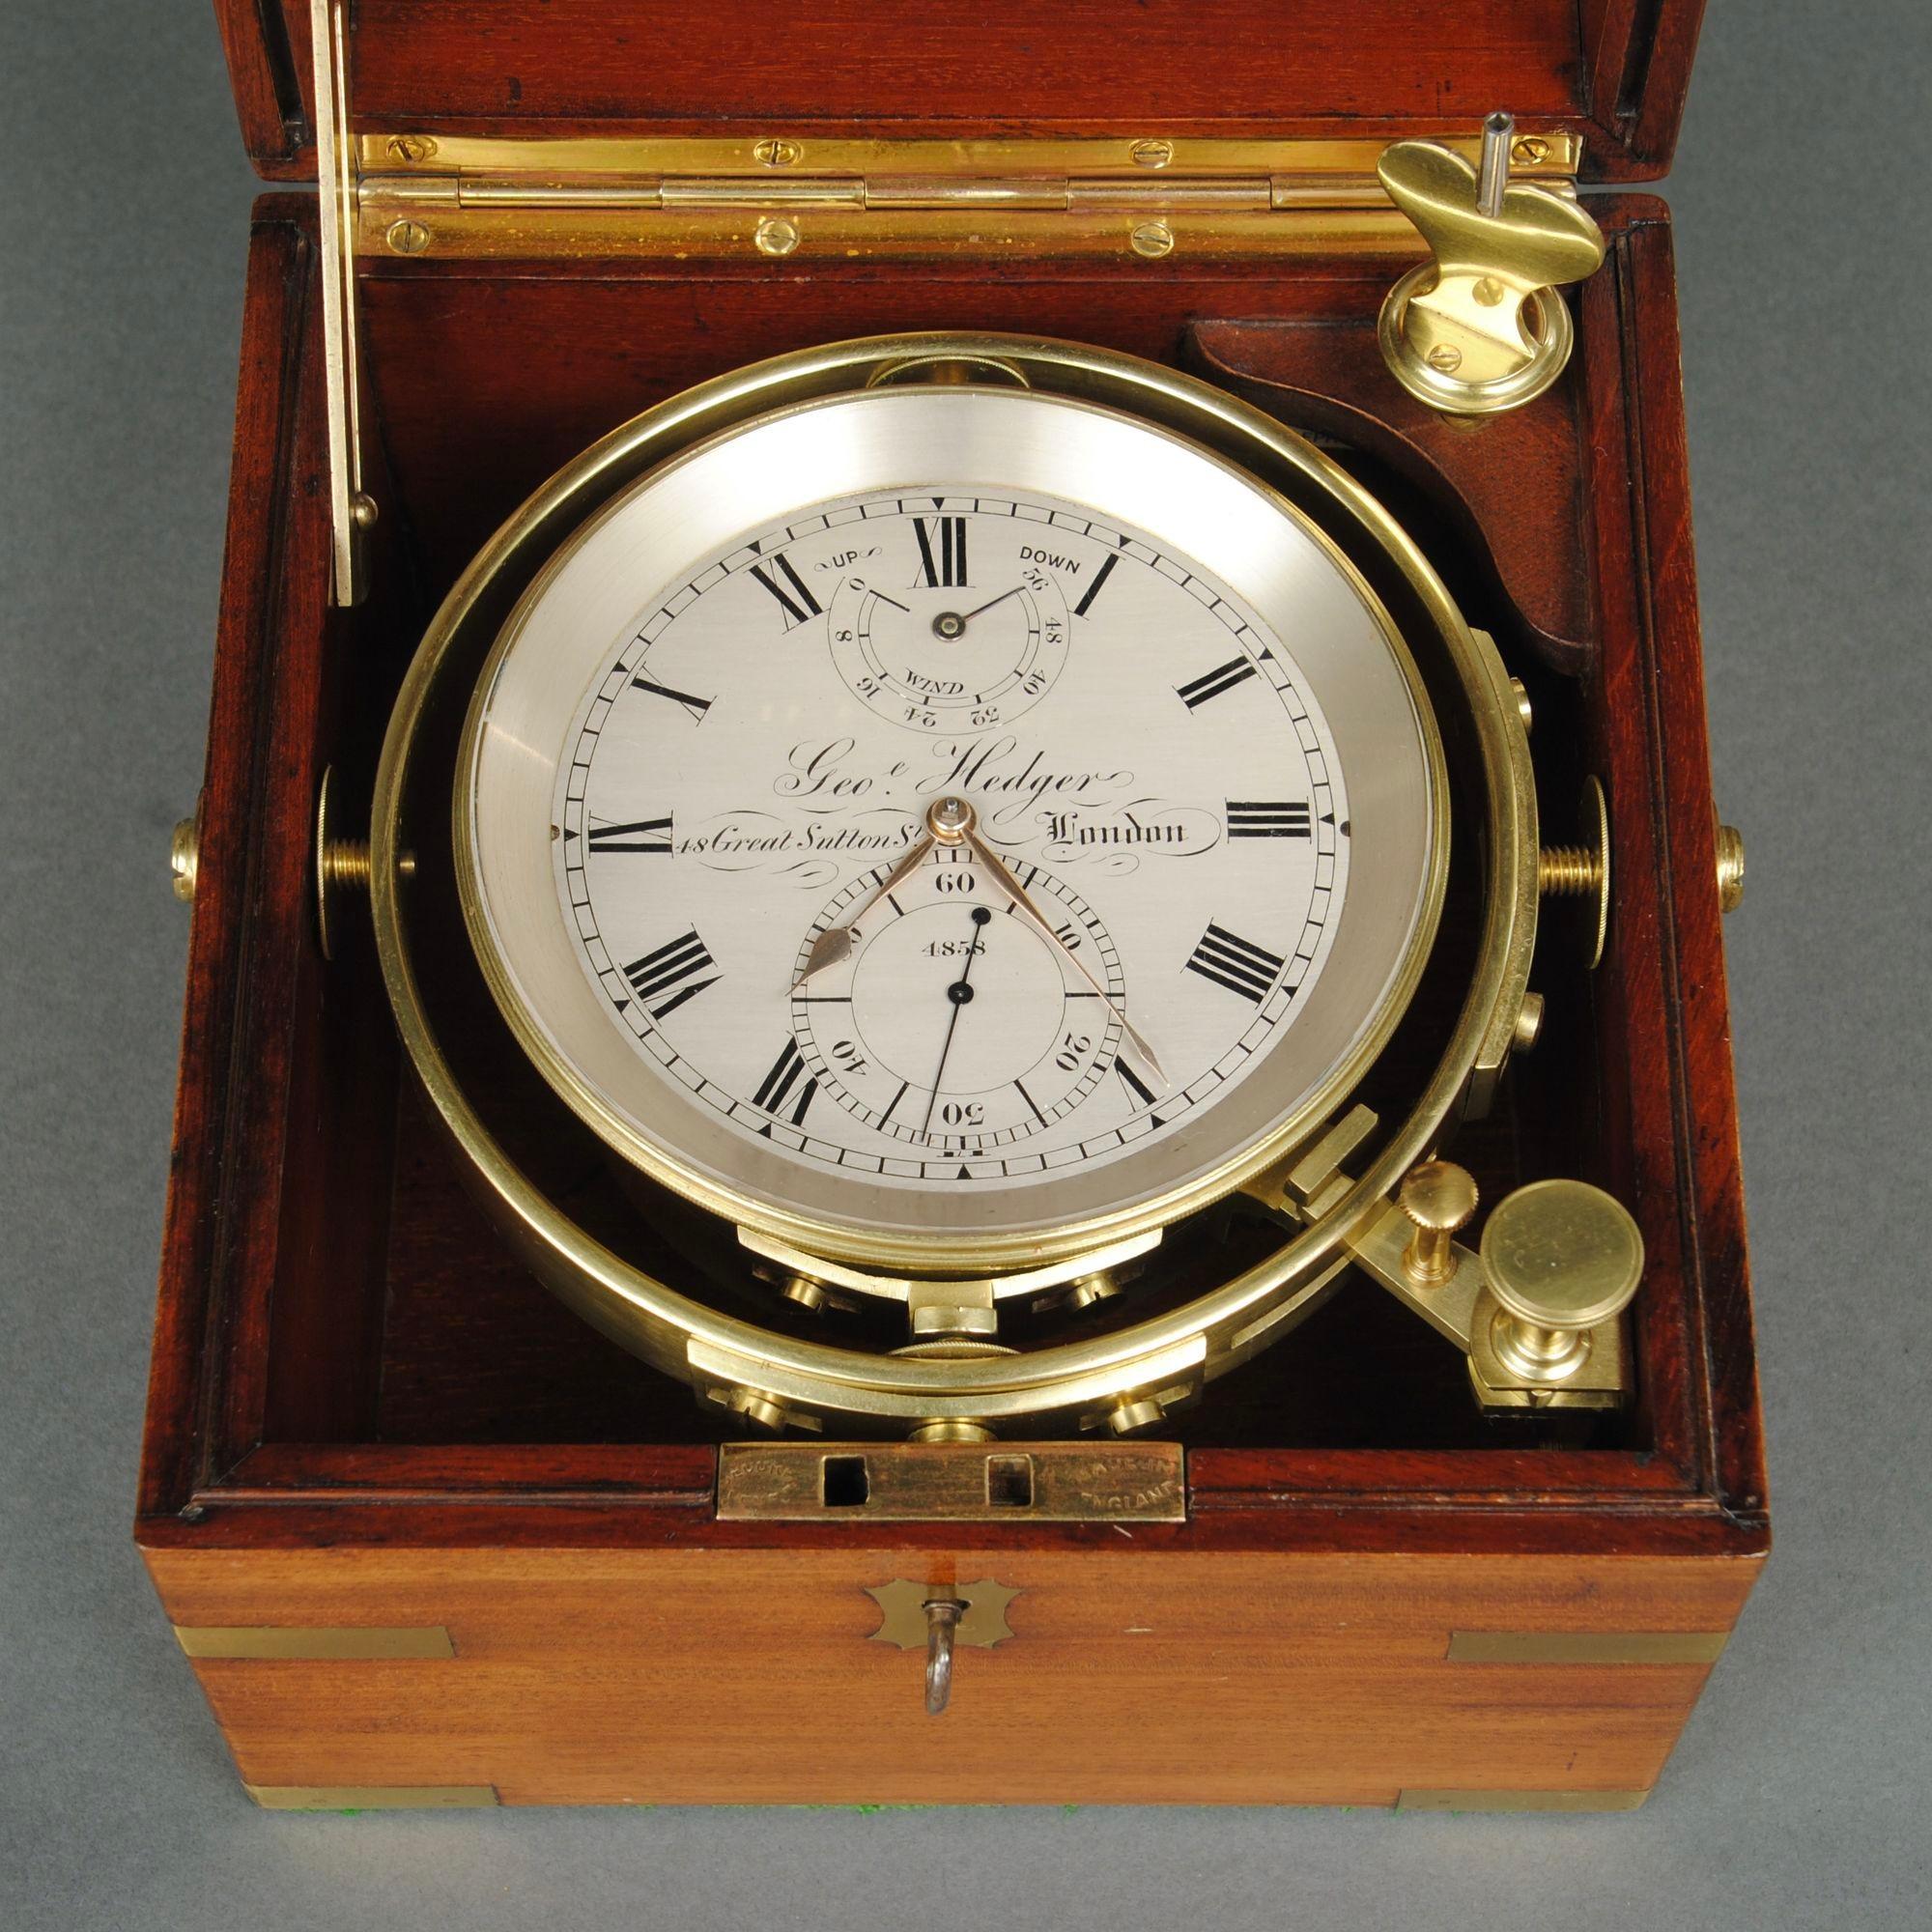 A fine example of a 2 day chronometer in the original 3 tier mahogany and brass bound case by William Hedger, the movement with the unusual layout is almost like an 8 day example made by Hedger himself who was a watch maker and worked at the address